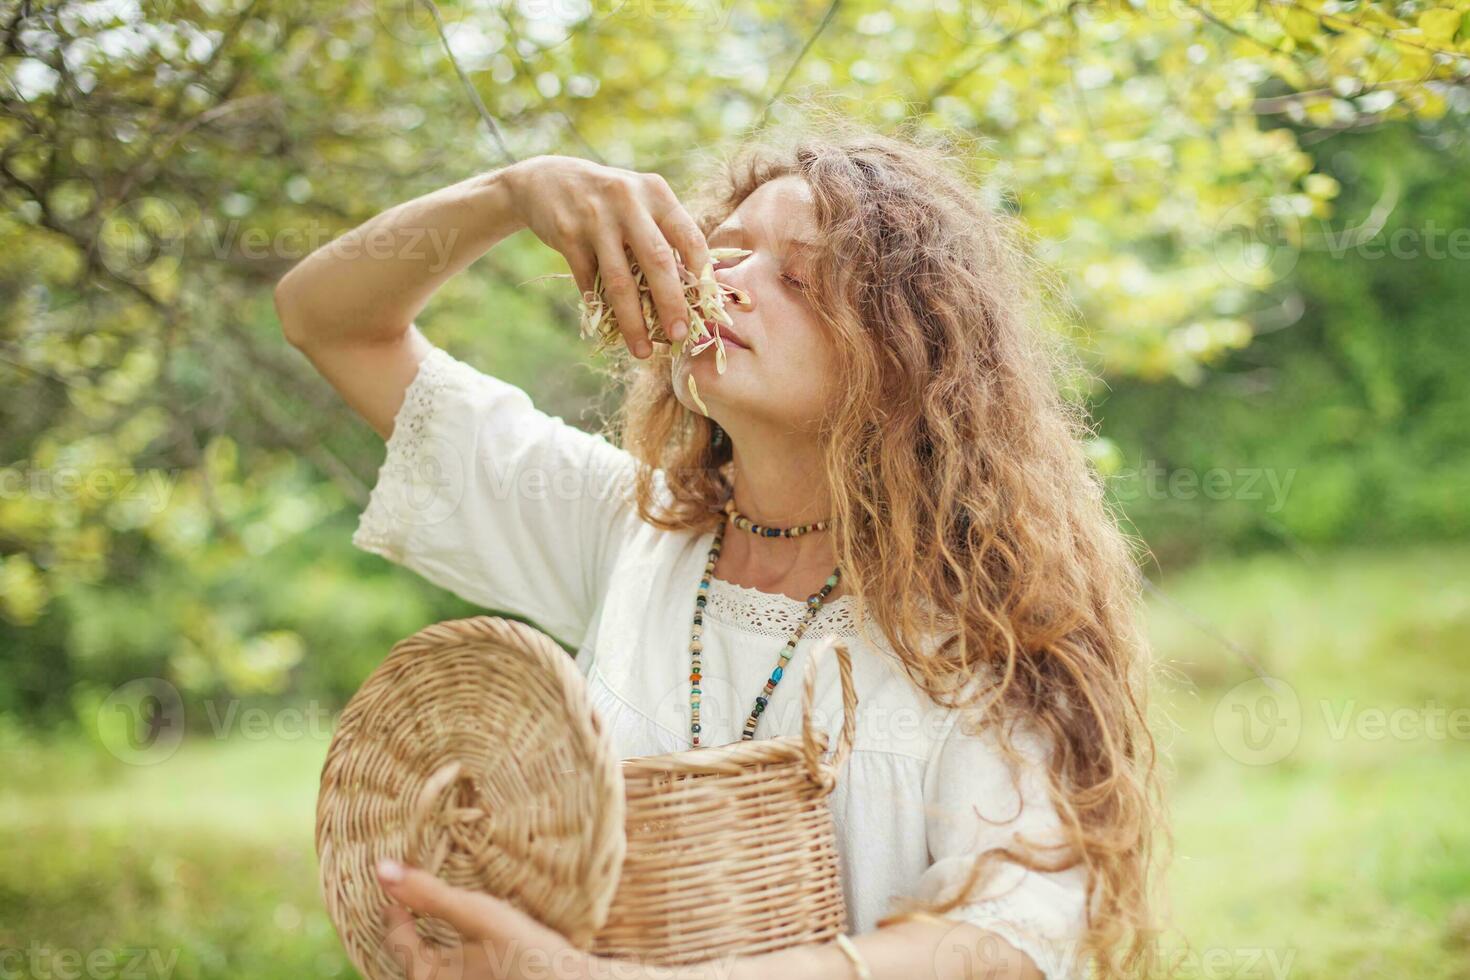 a woman with long hair and a basket photo